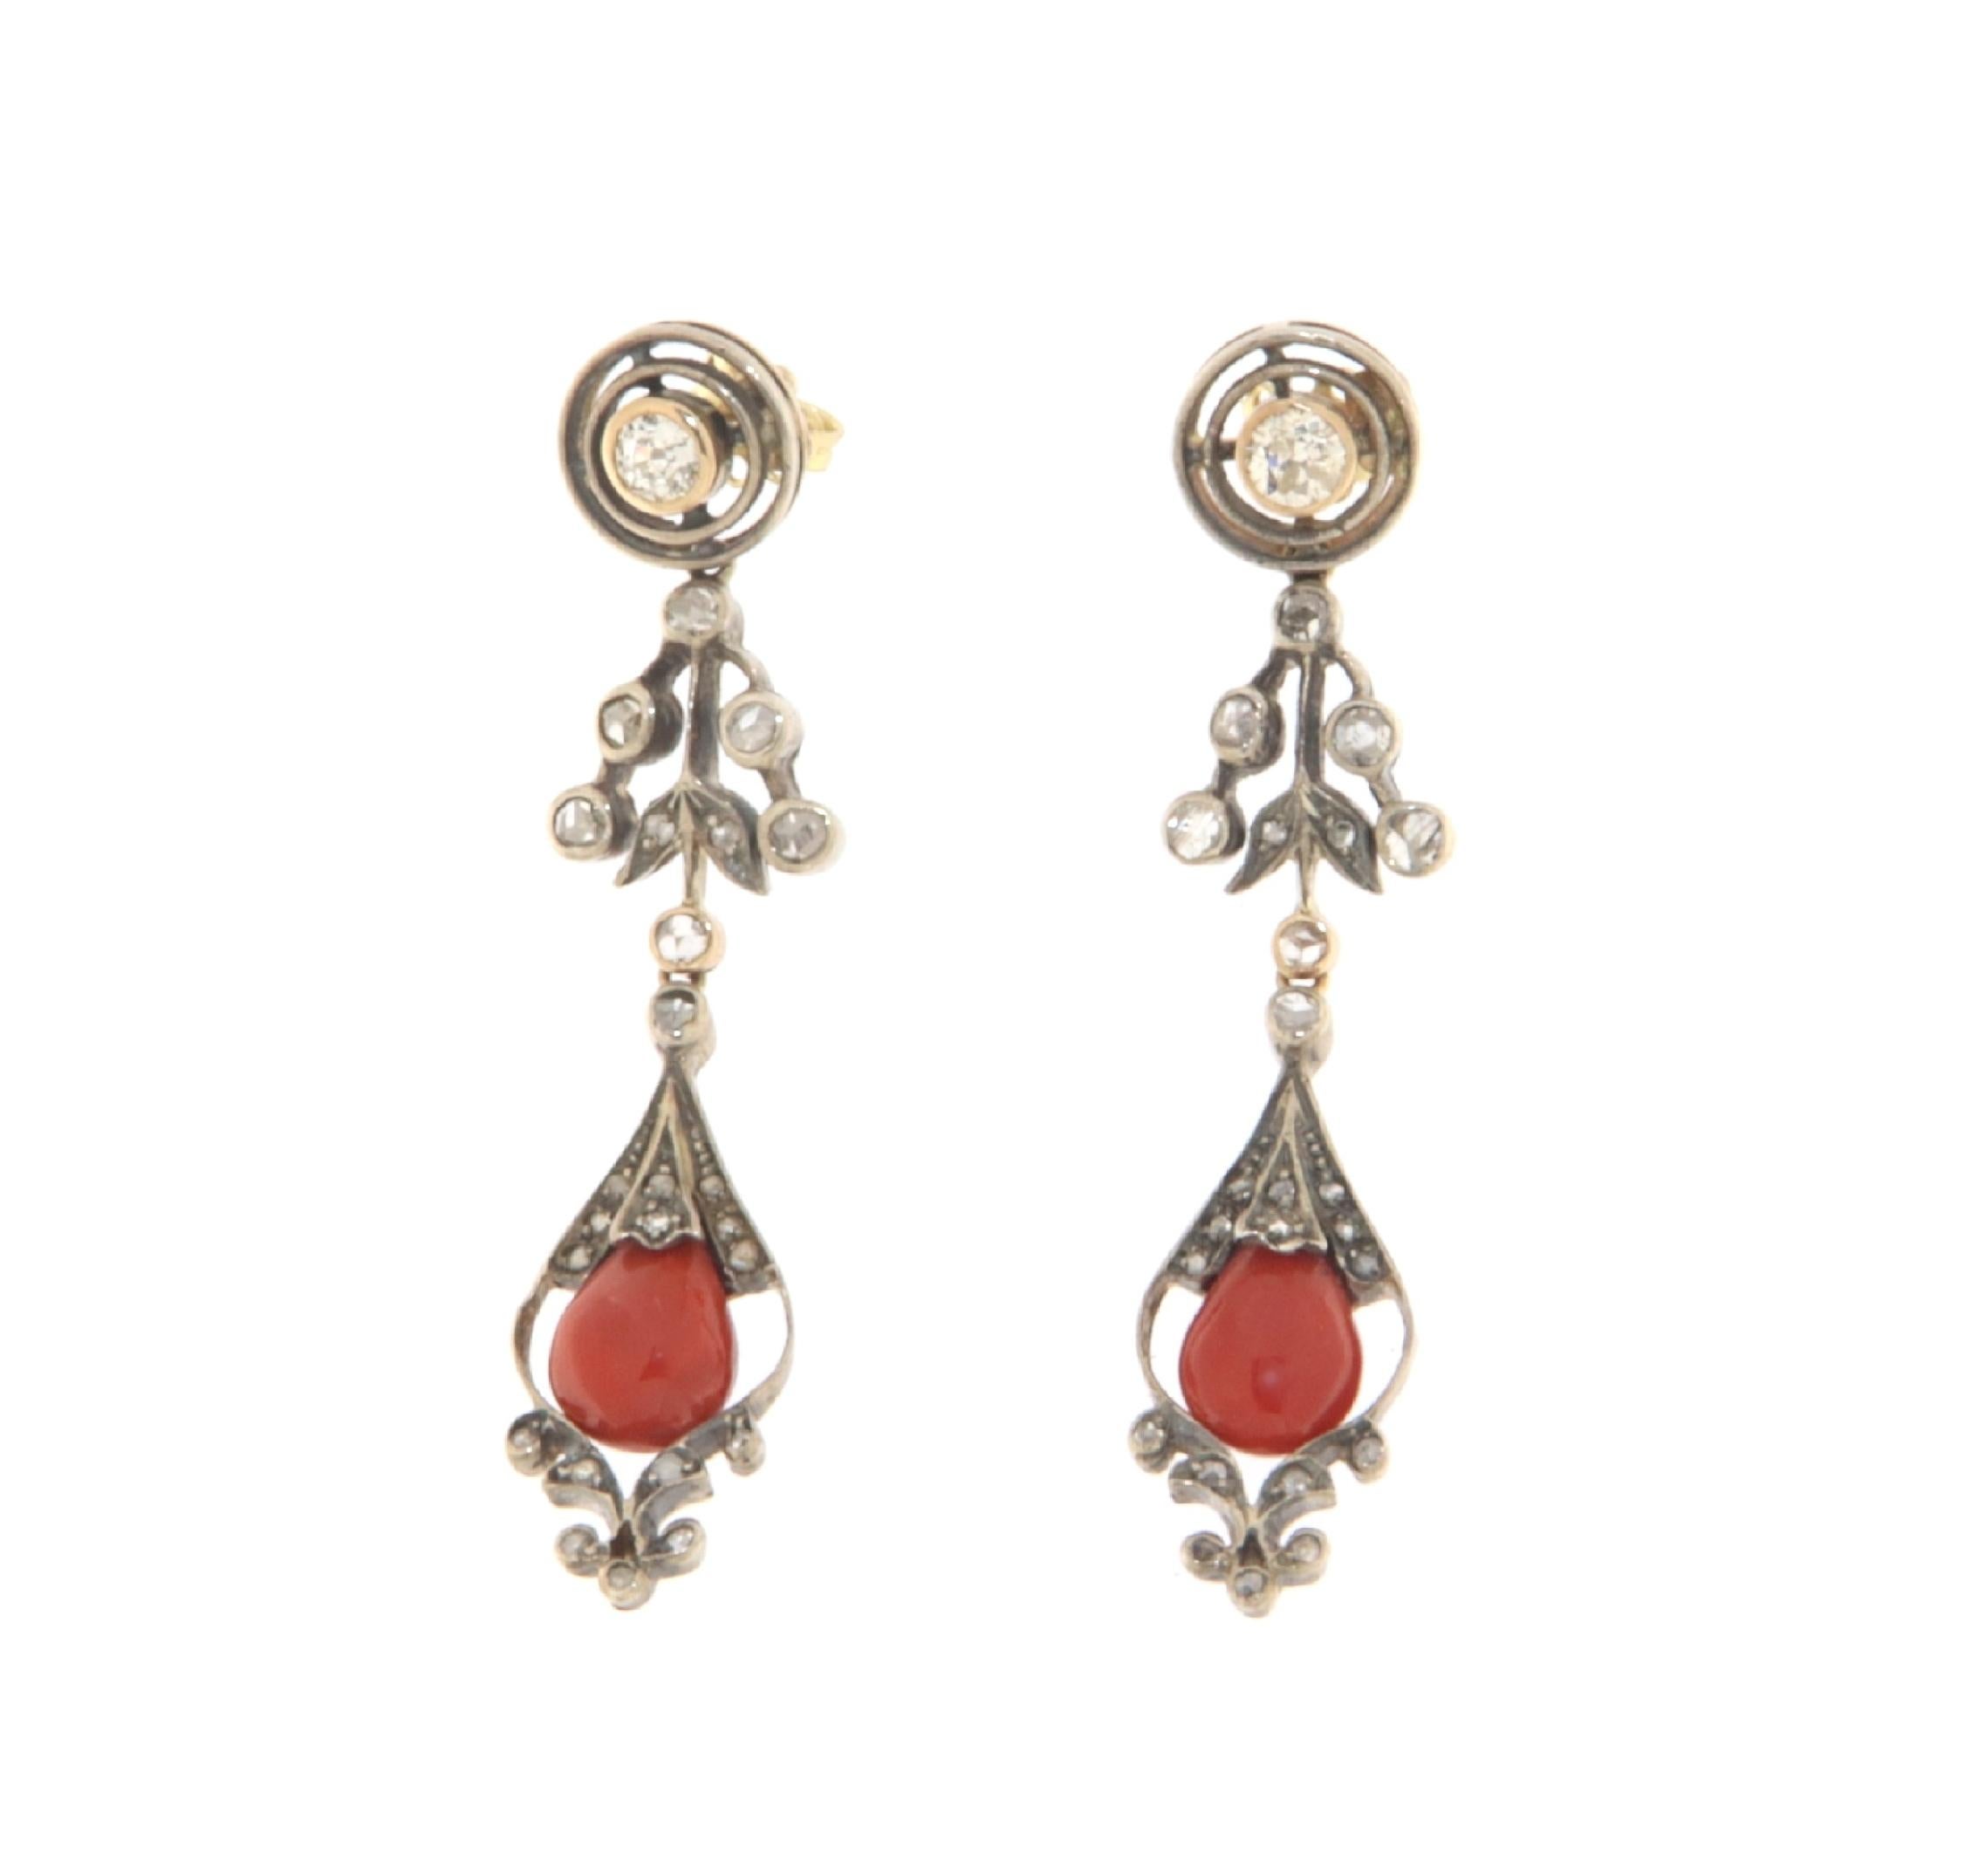 Sardinian Coral Diamonds 14 Karat White Gold Drop Earrings In New Condition For Sale In Marcianise, IT